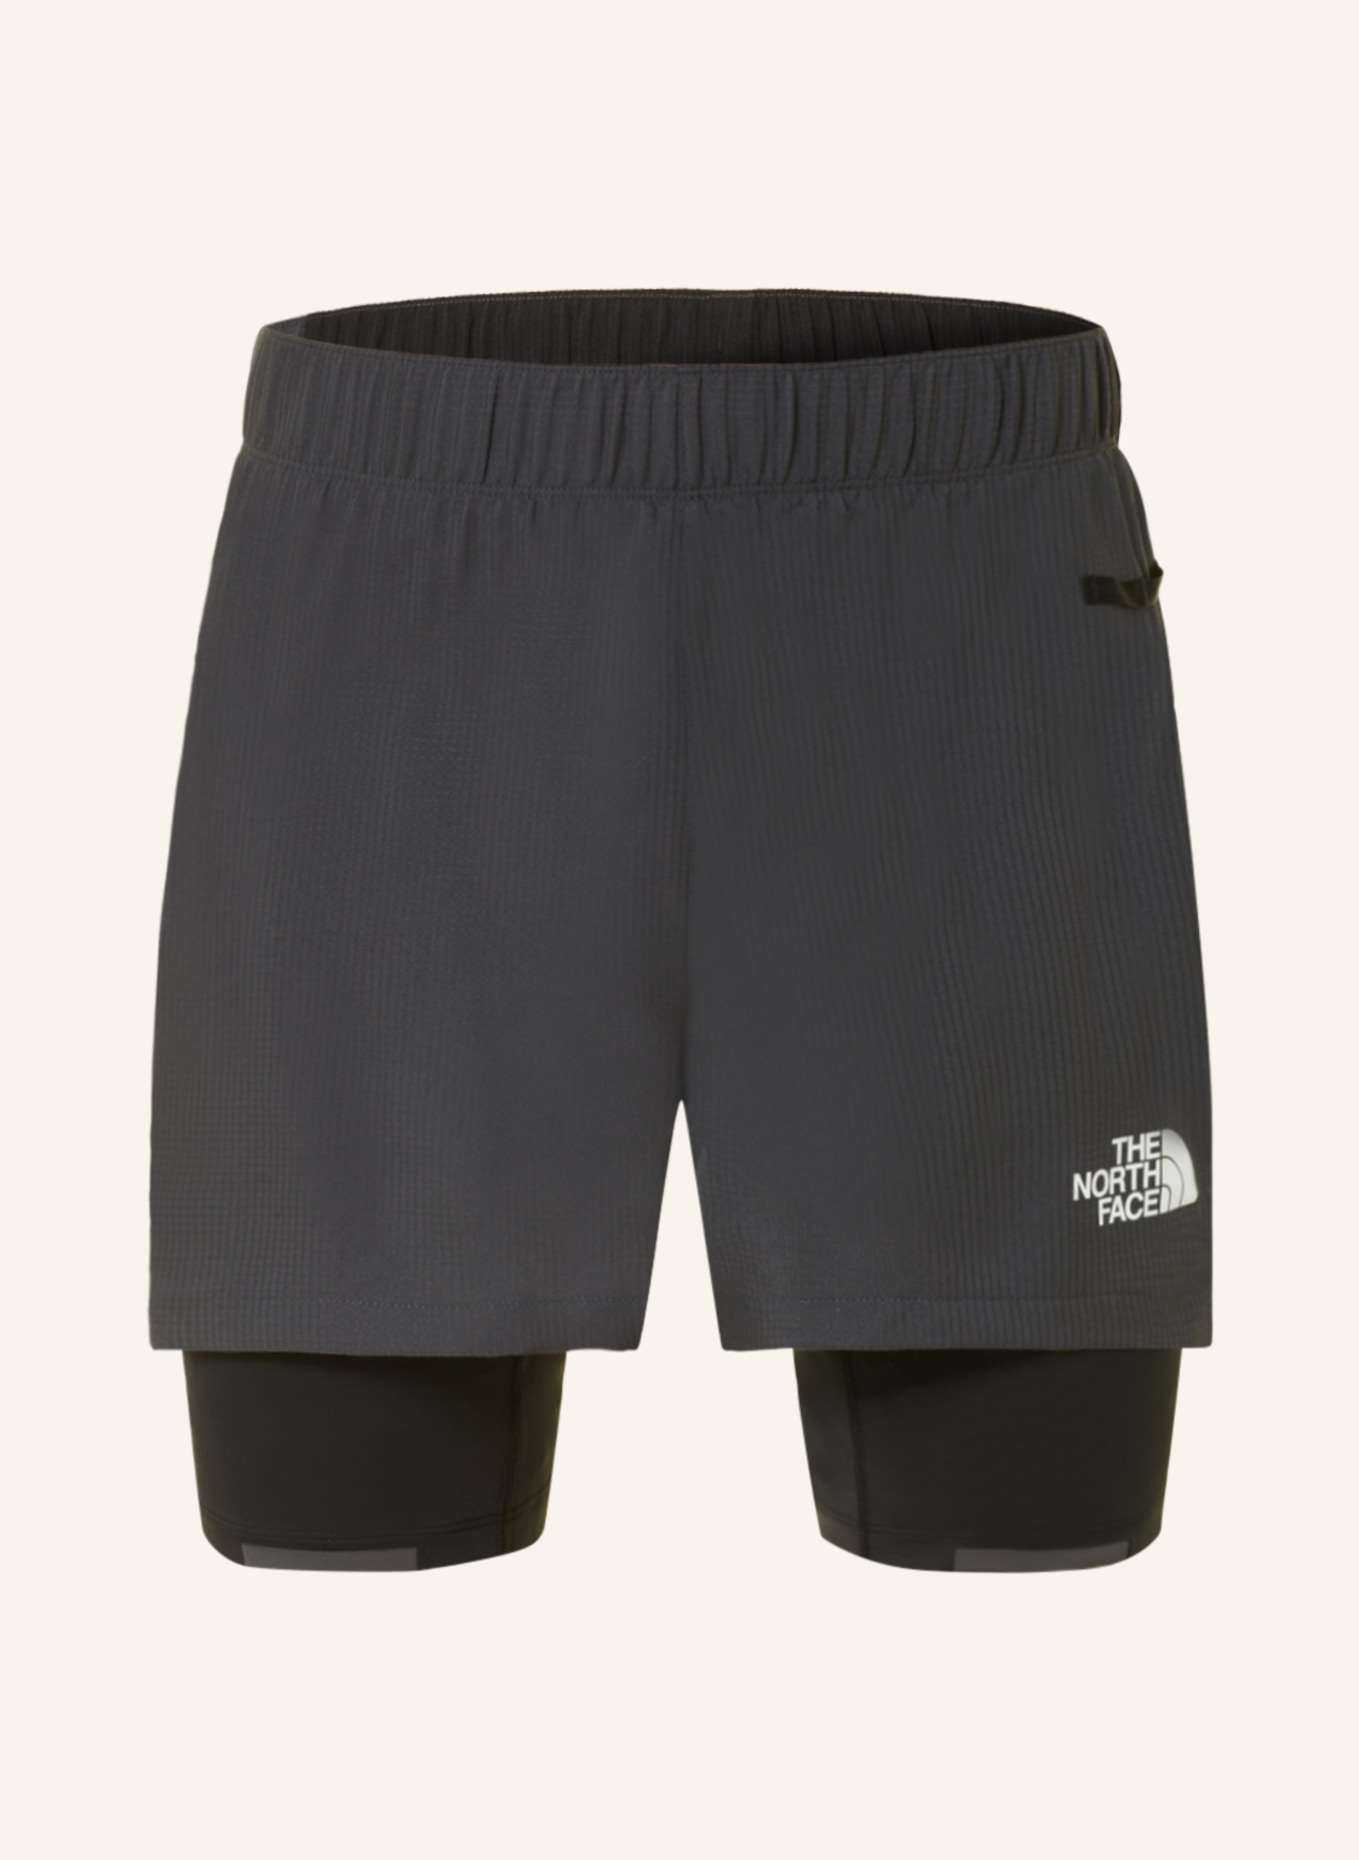 THE NORTH FACE 2-in-1 running shorts MOUNTAIN ATHLETICS LAB in dark gray